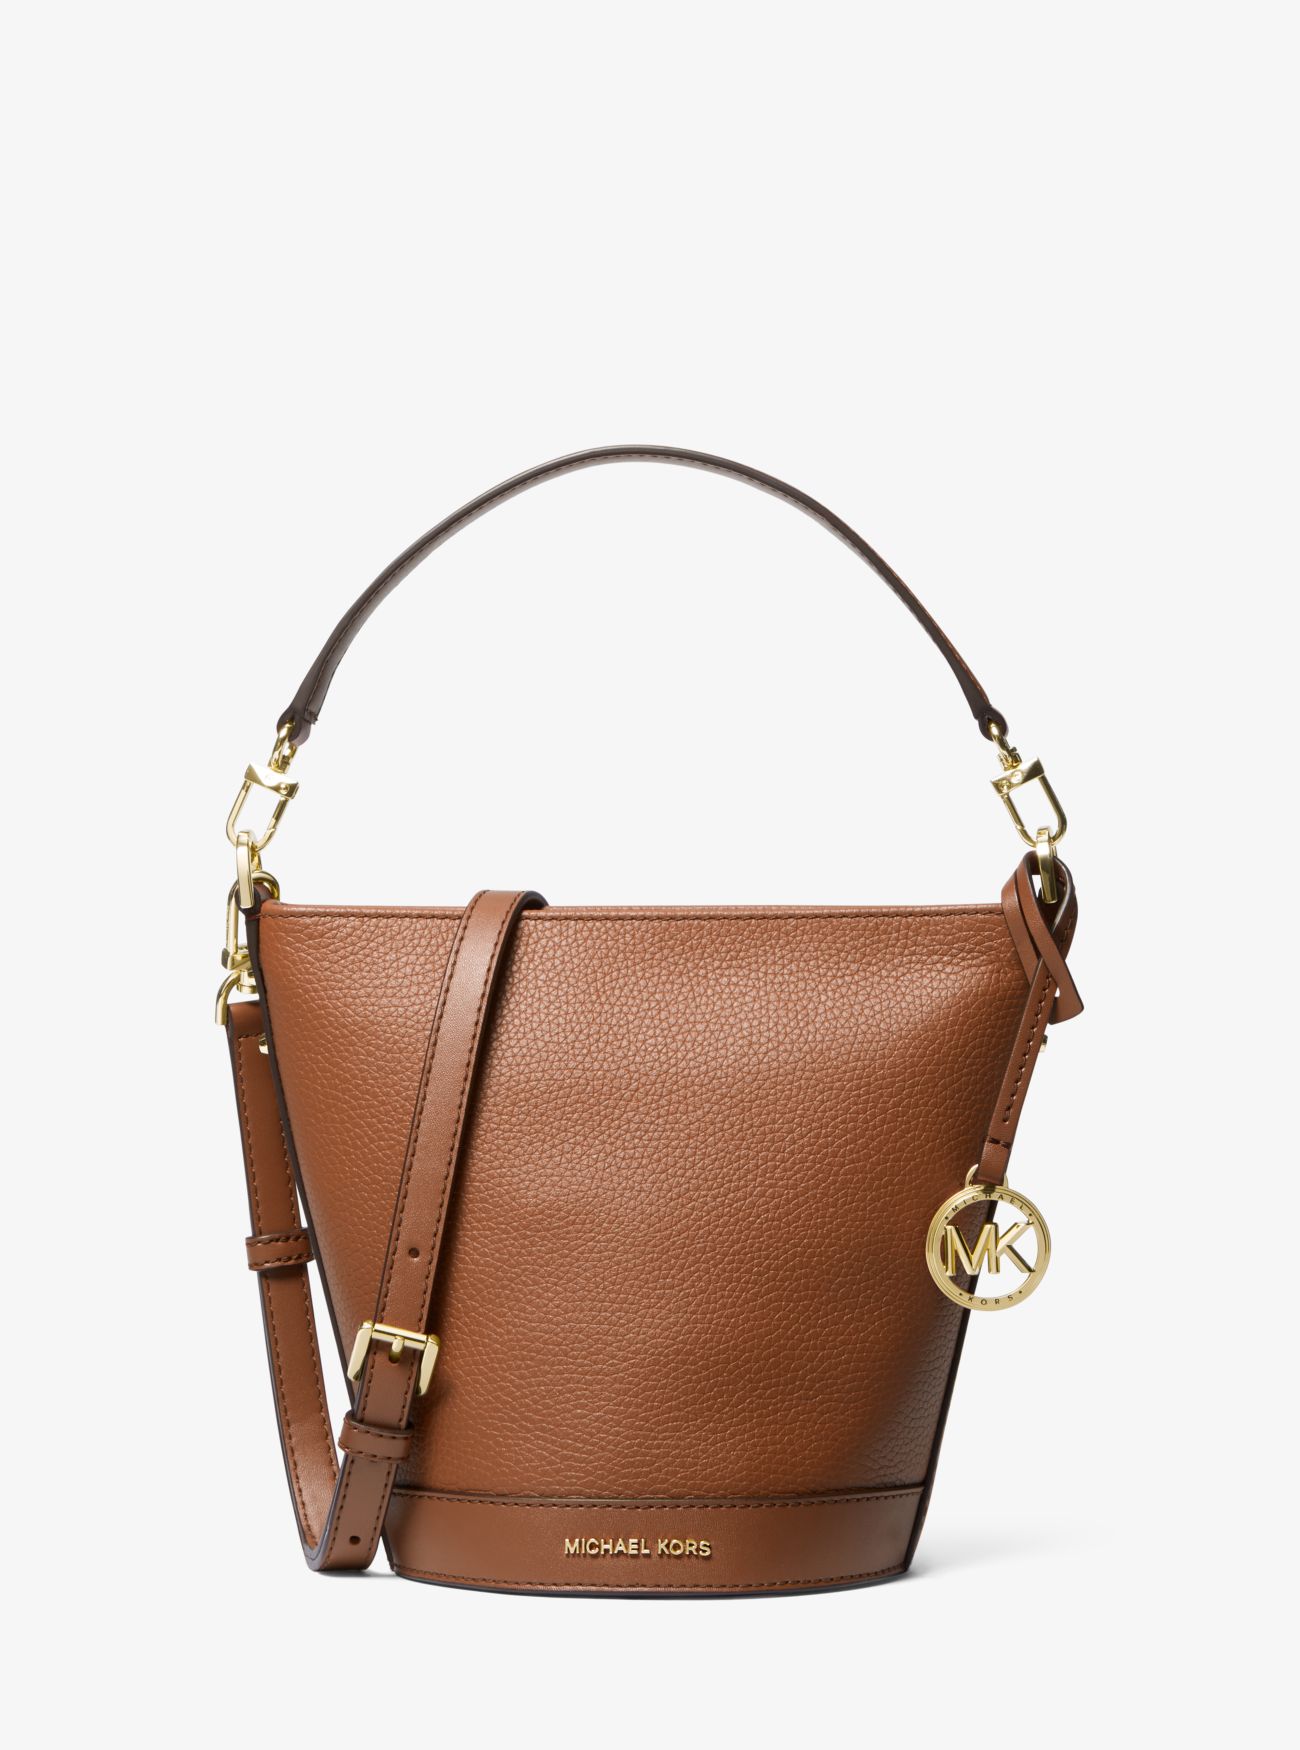 MK Townsend Small Pebbled Leather Crossbody Bag - Luggage Brown - Michael Kors